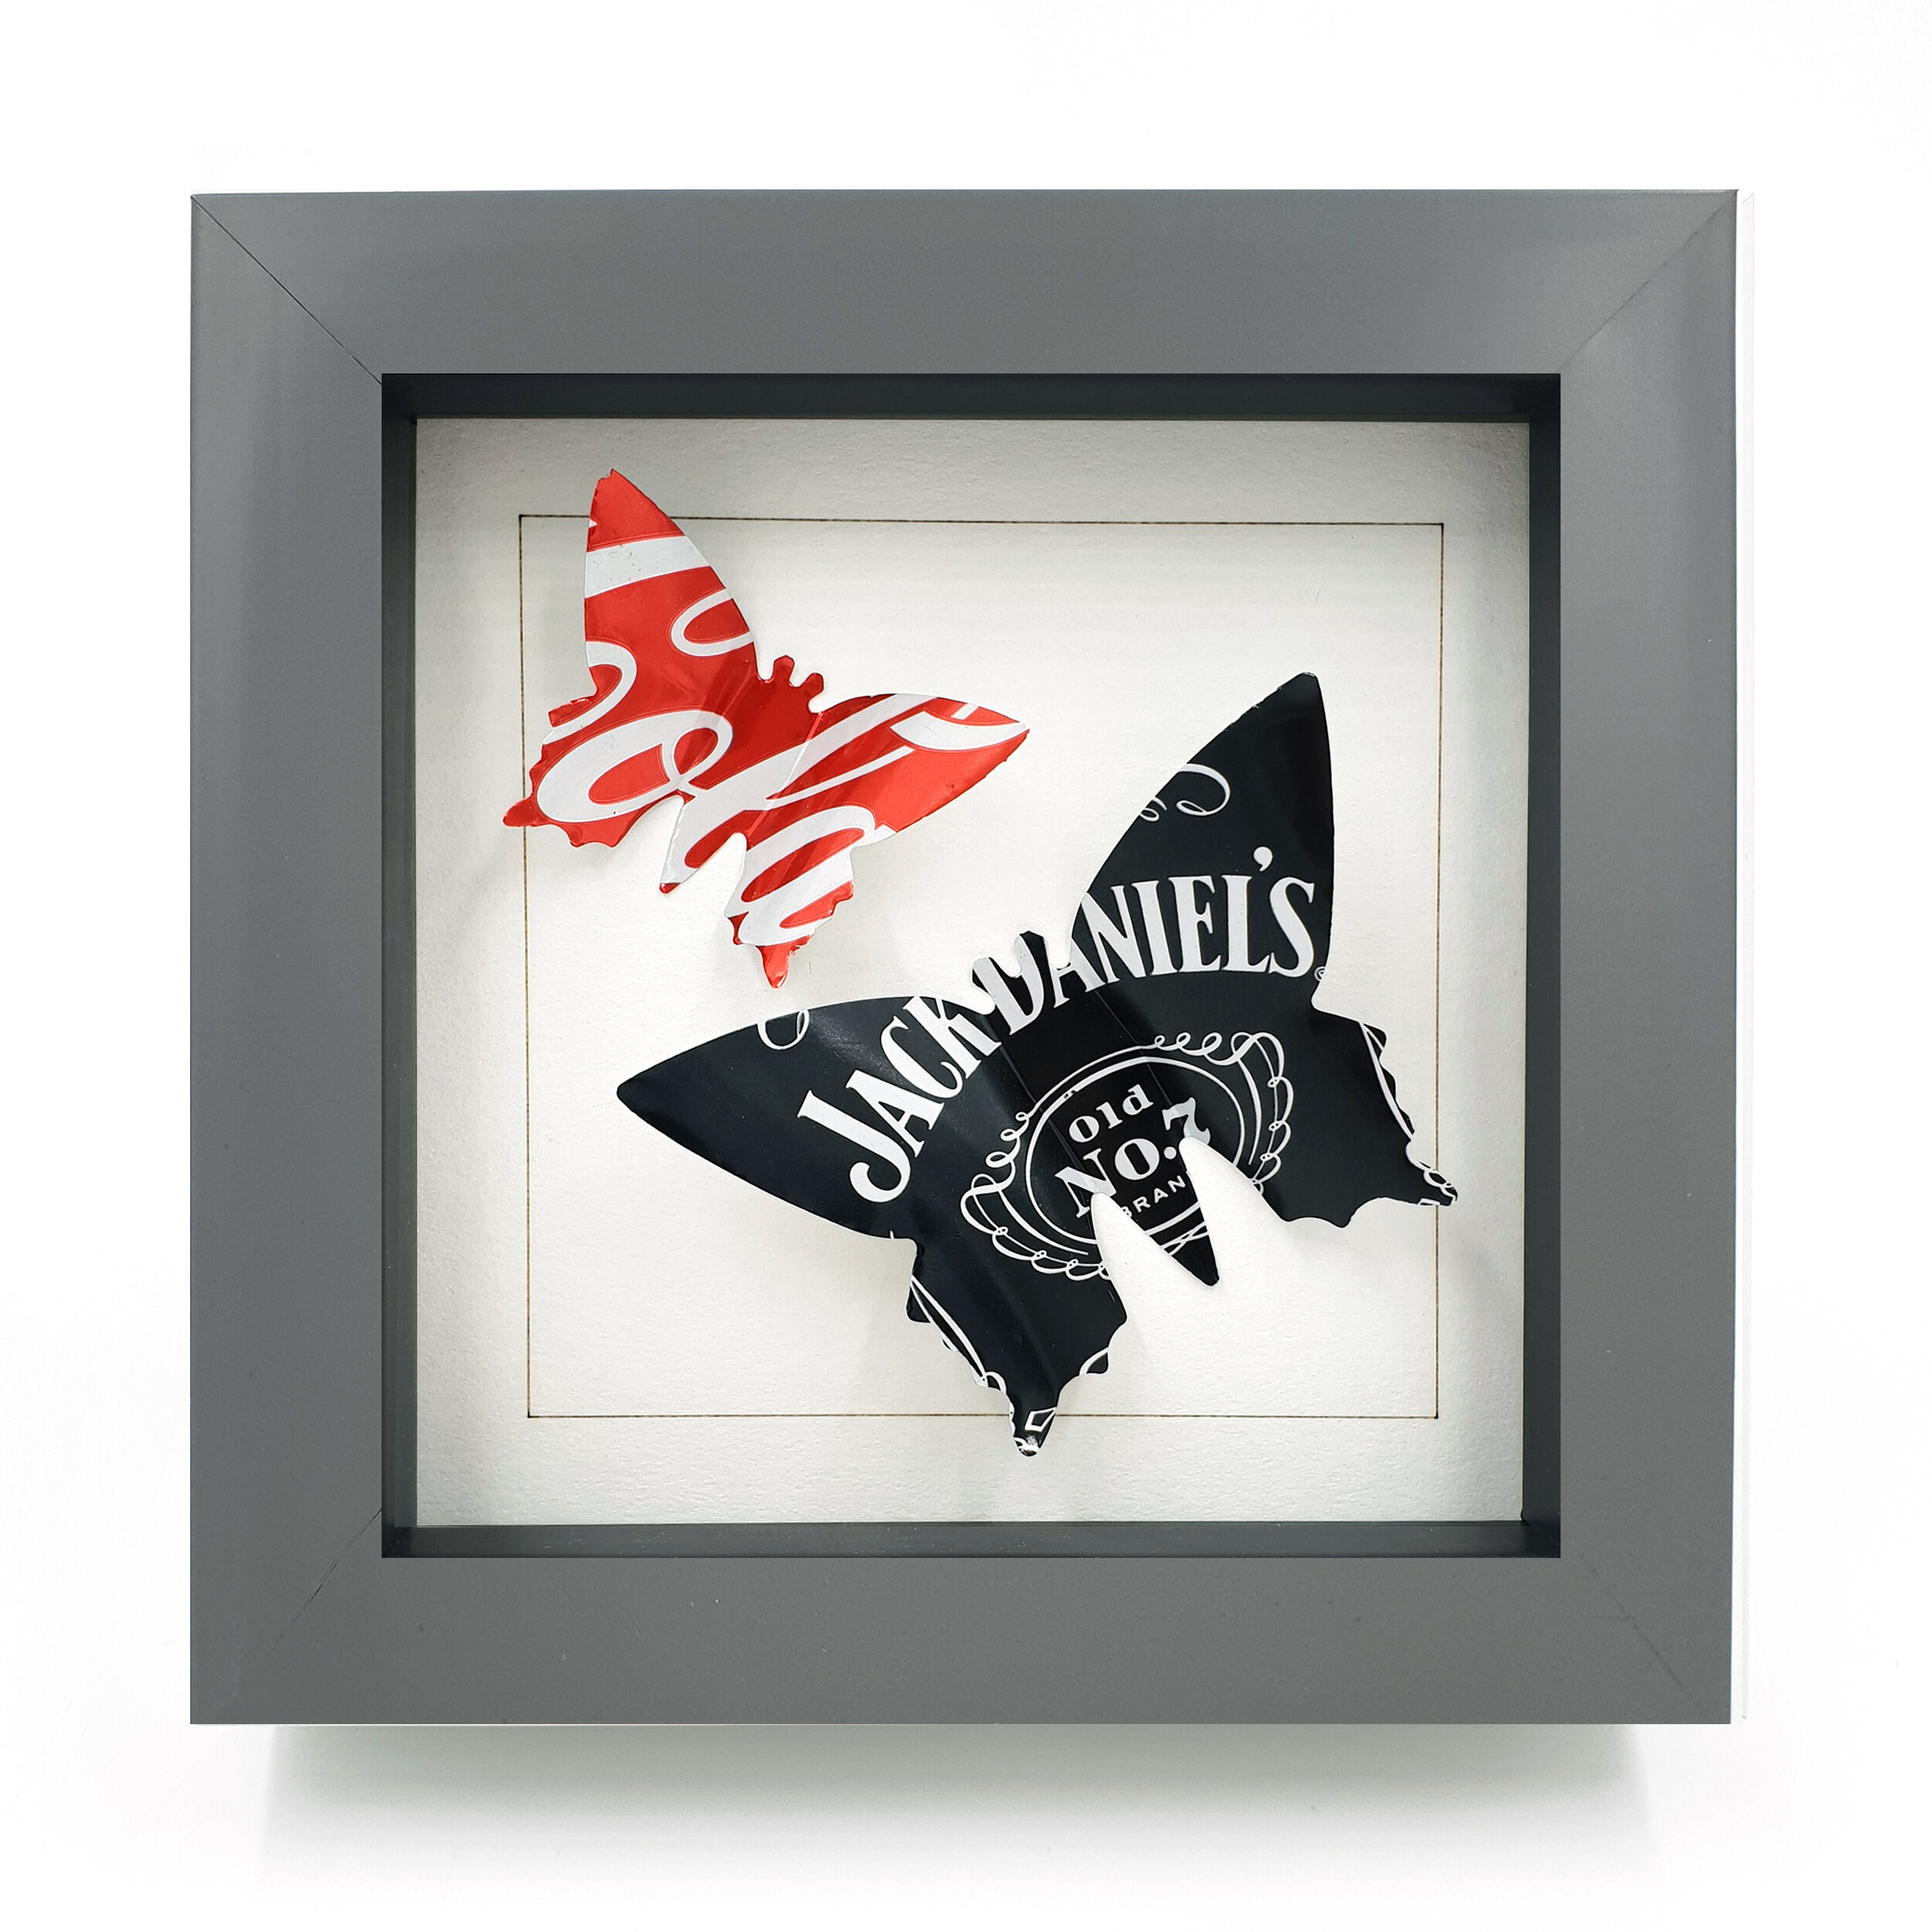 Red and black Coca-Cola and Jack Daniels double butterfly eco art  grey frame